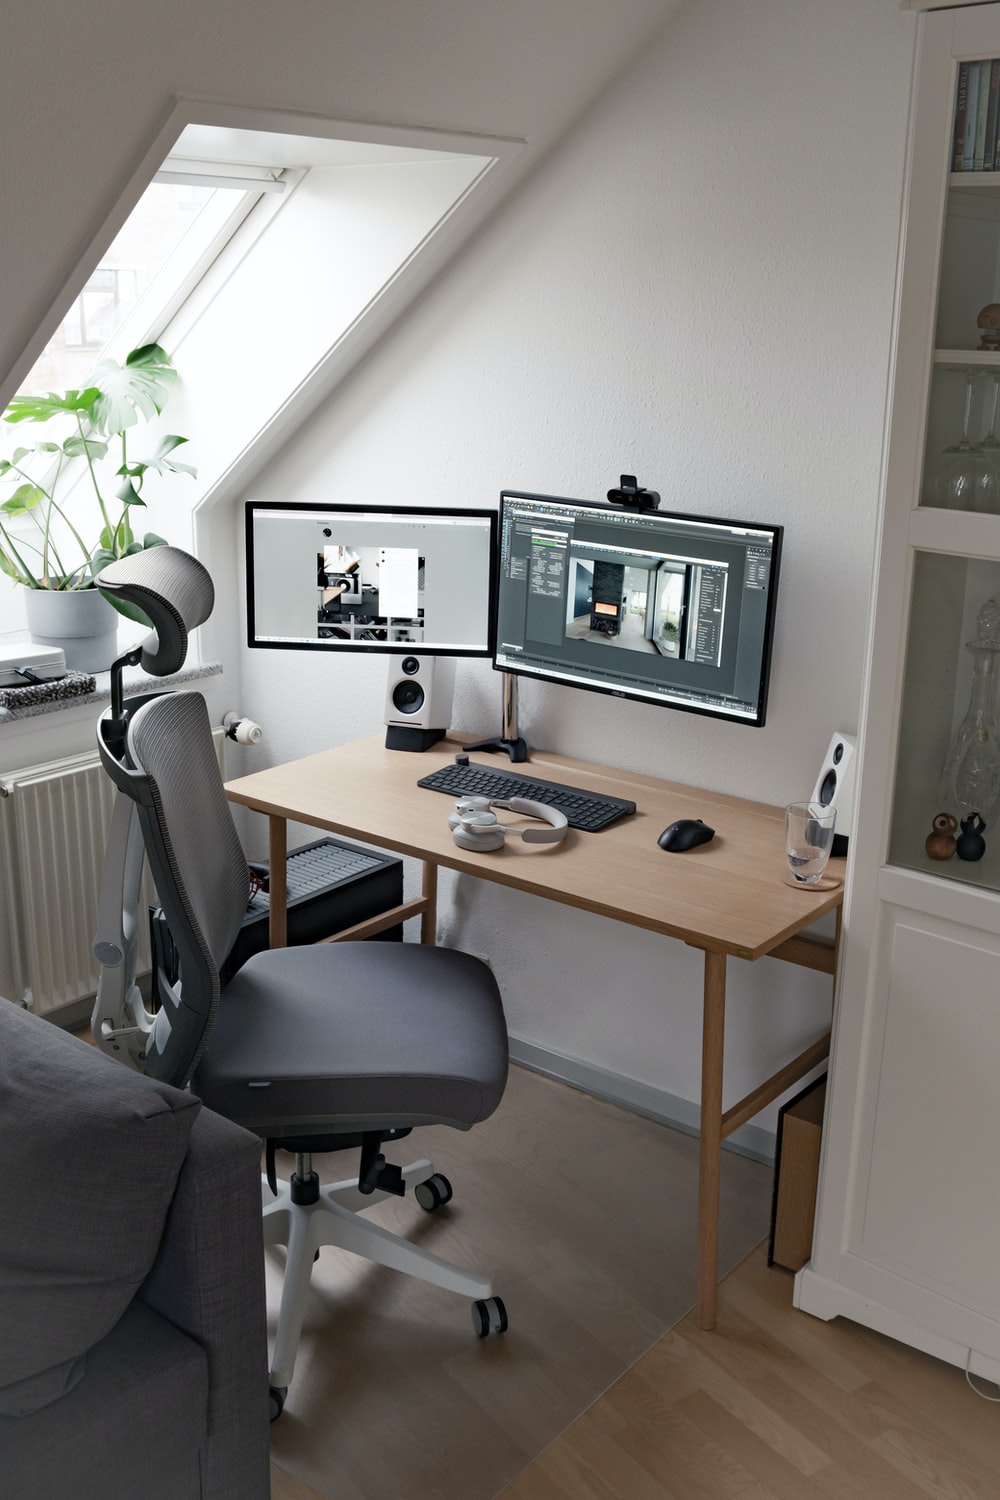 Workstation Picture. Download Free Image